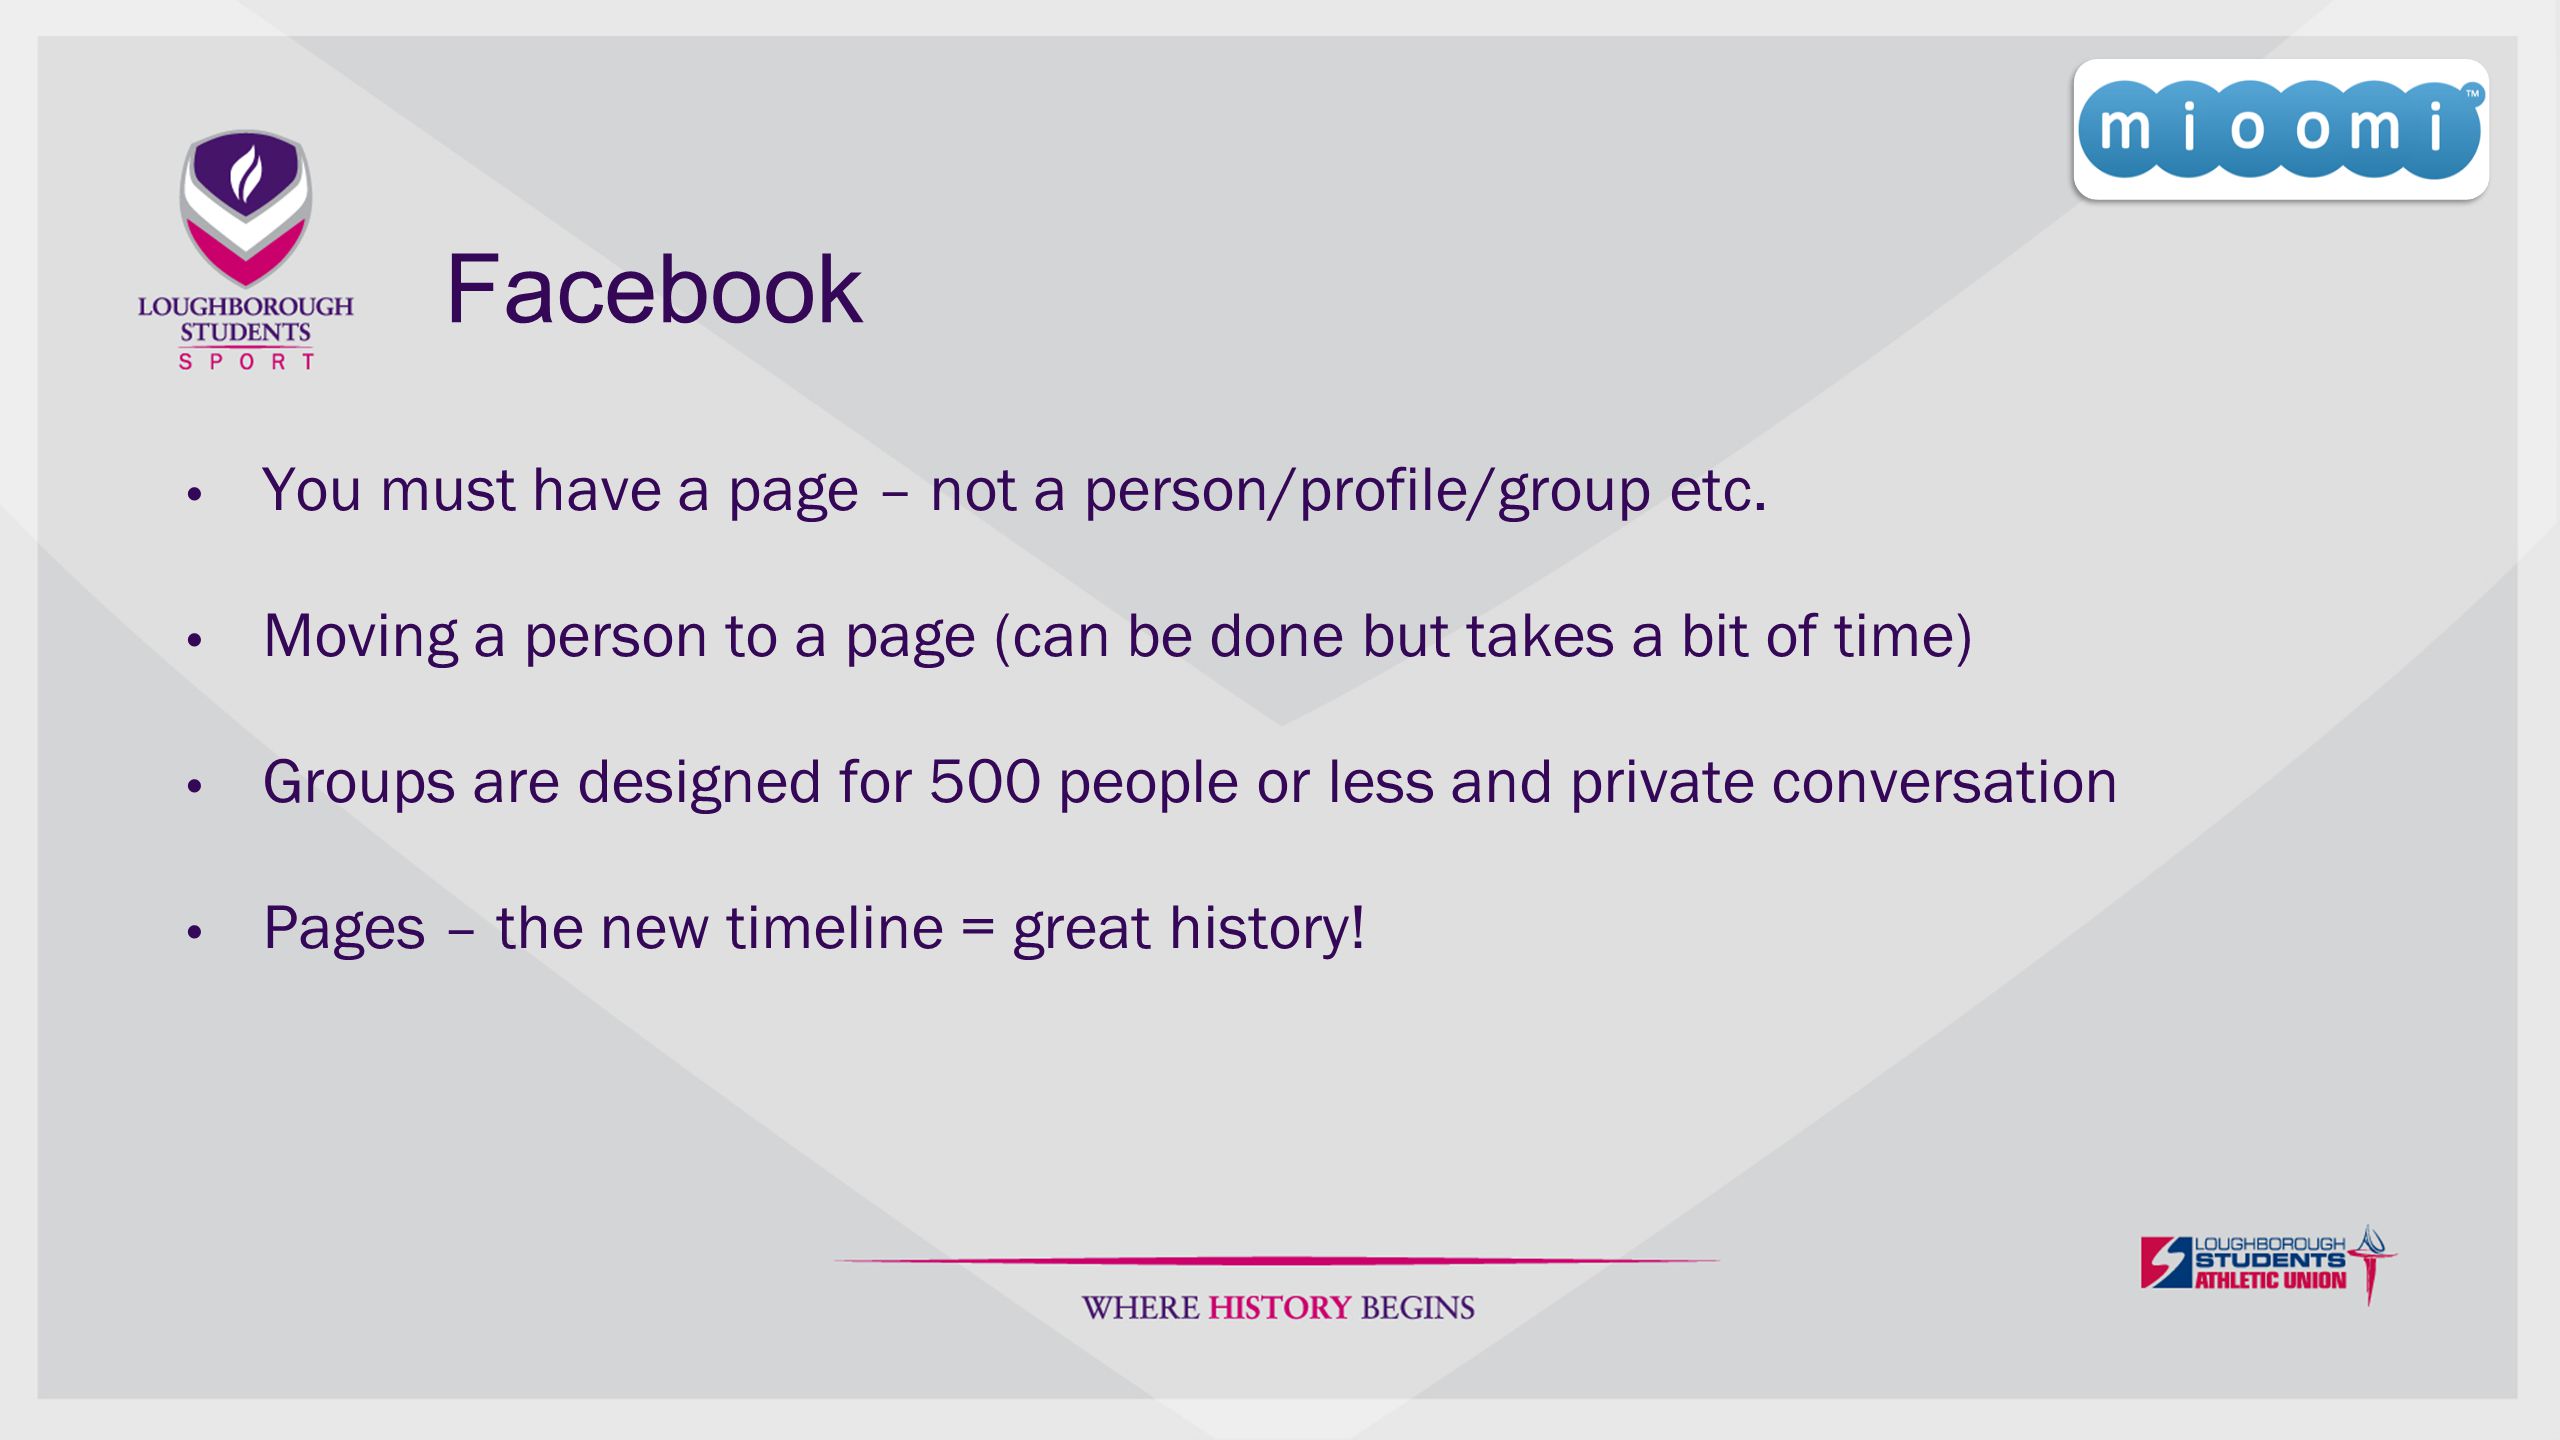 Facebook You must have a page – not a person/profile/group etc.